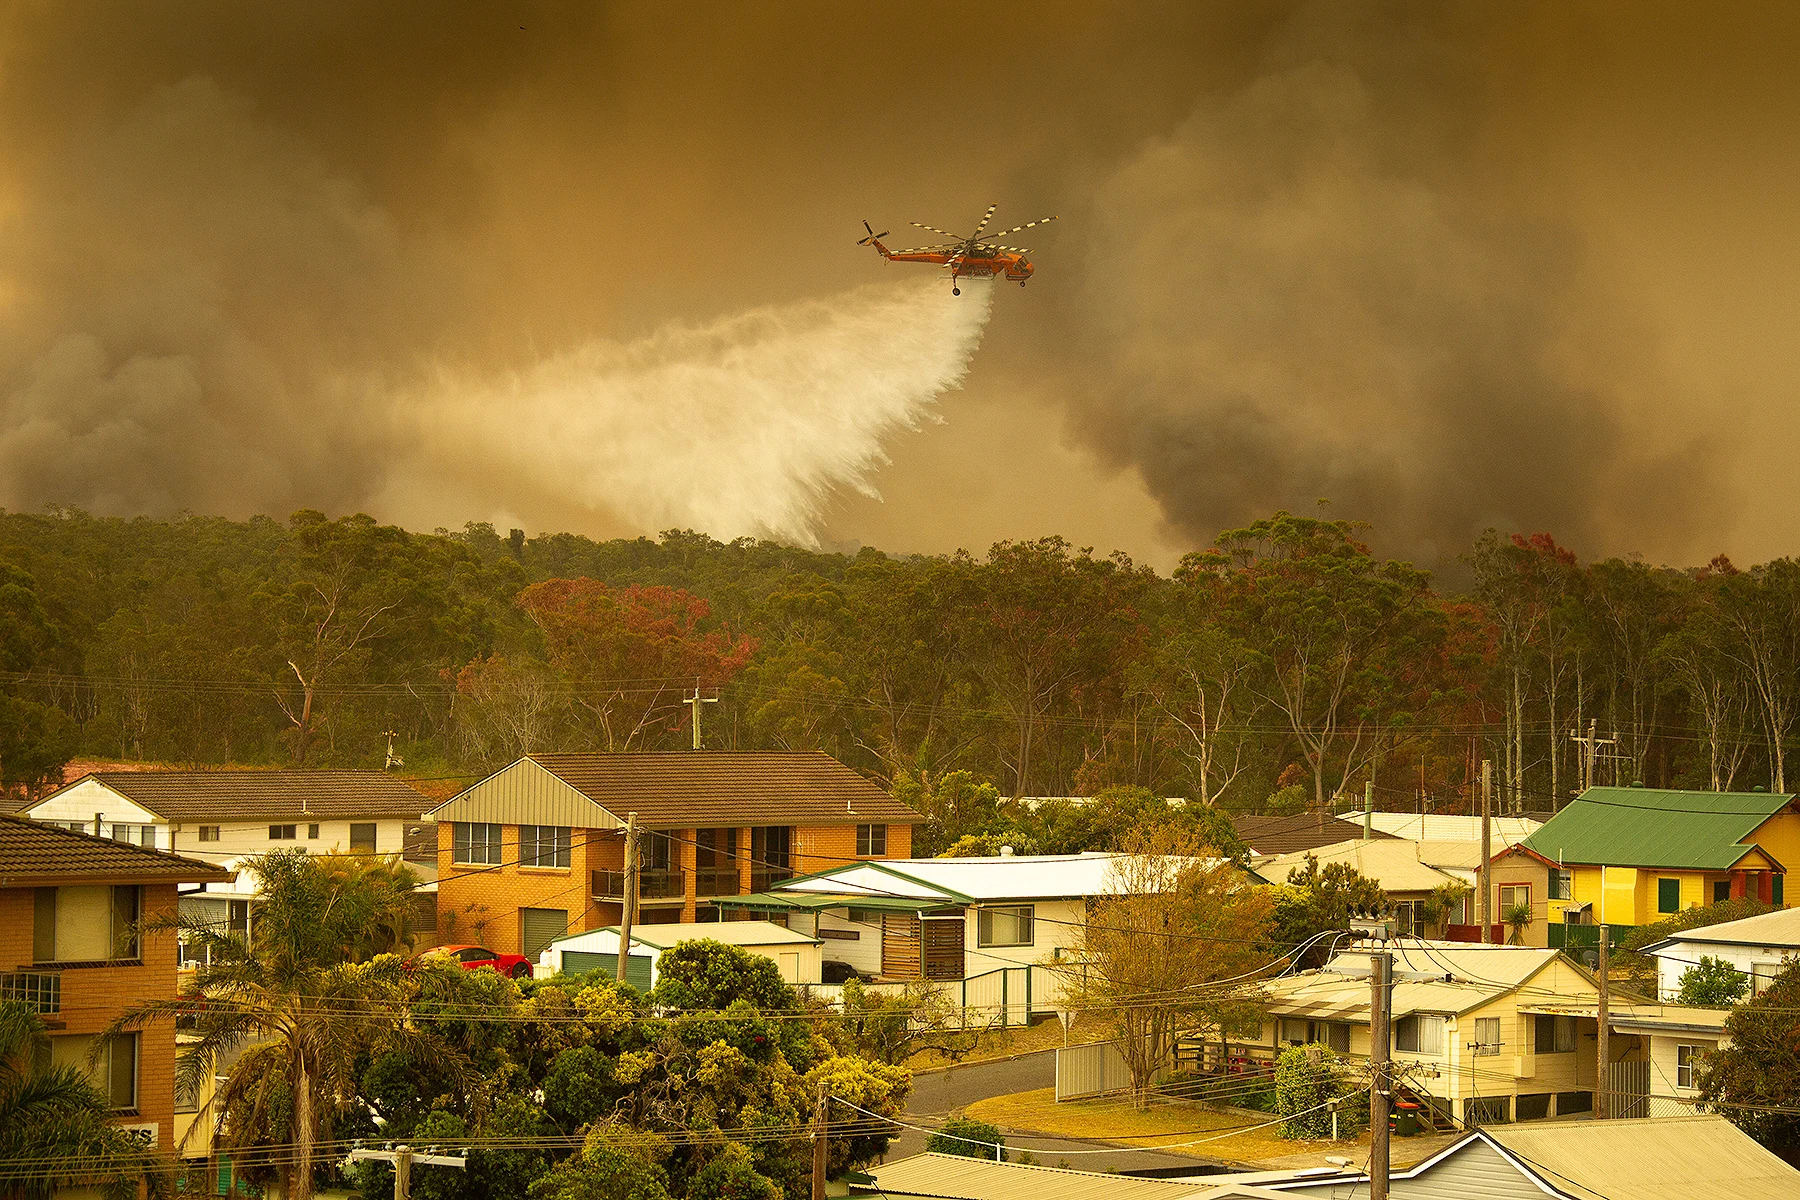 Australia water bomber helicopter Shane Chalkervia REUTERS